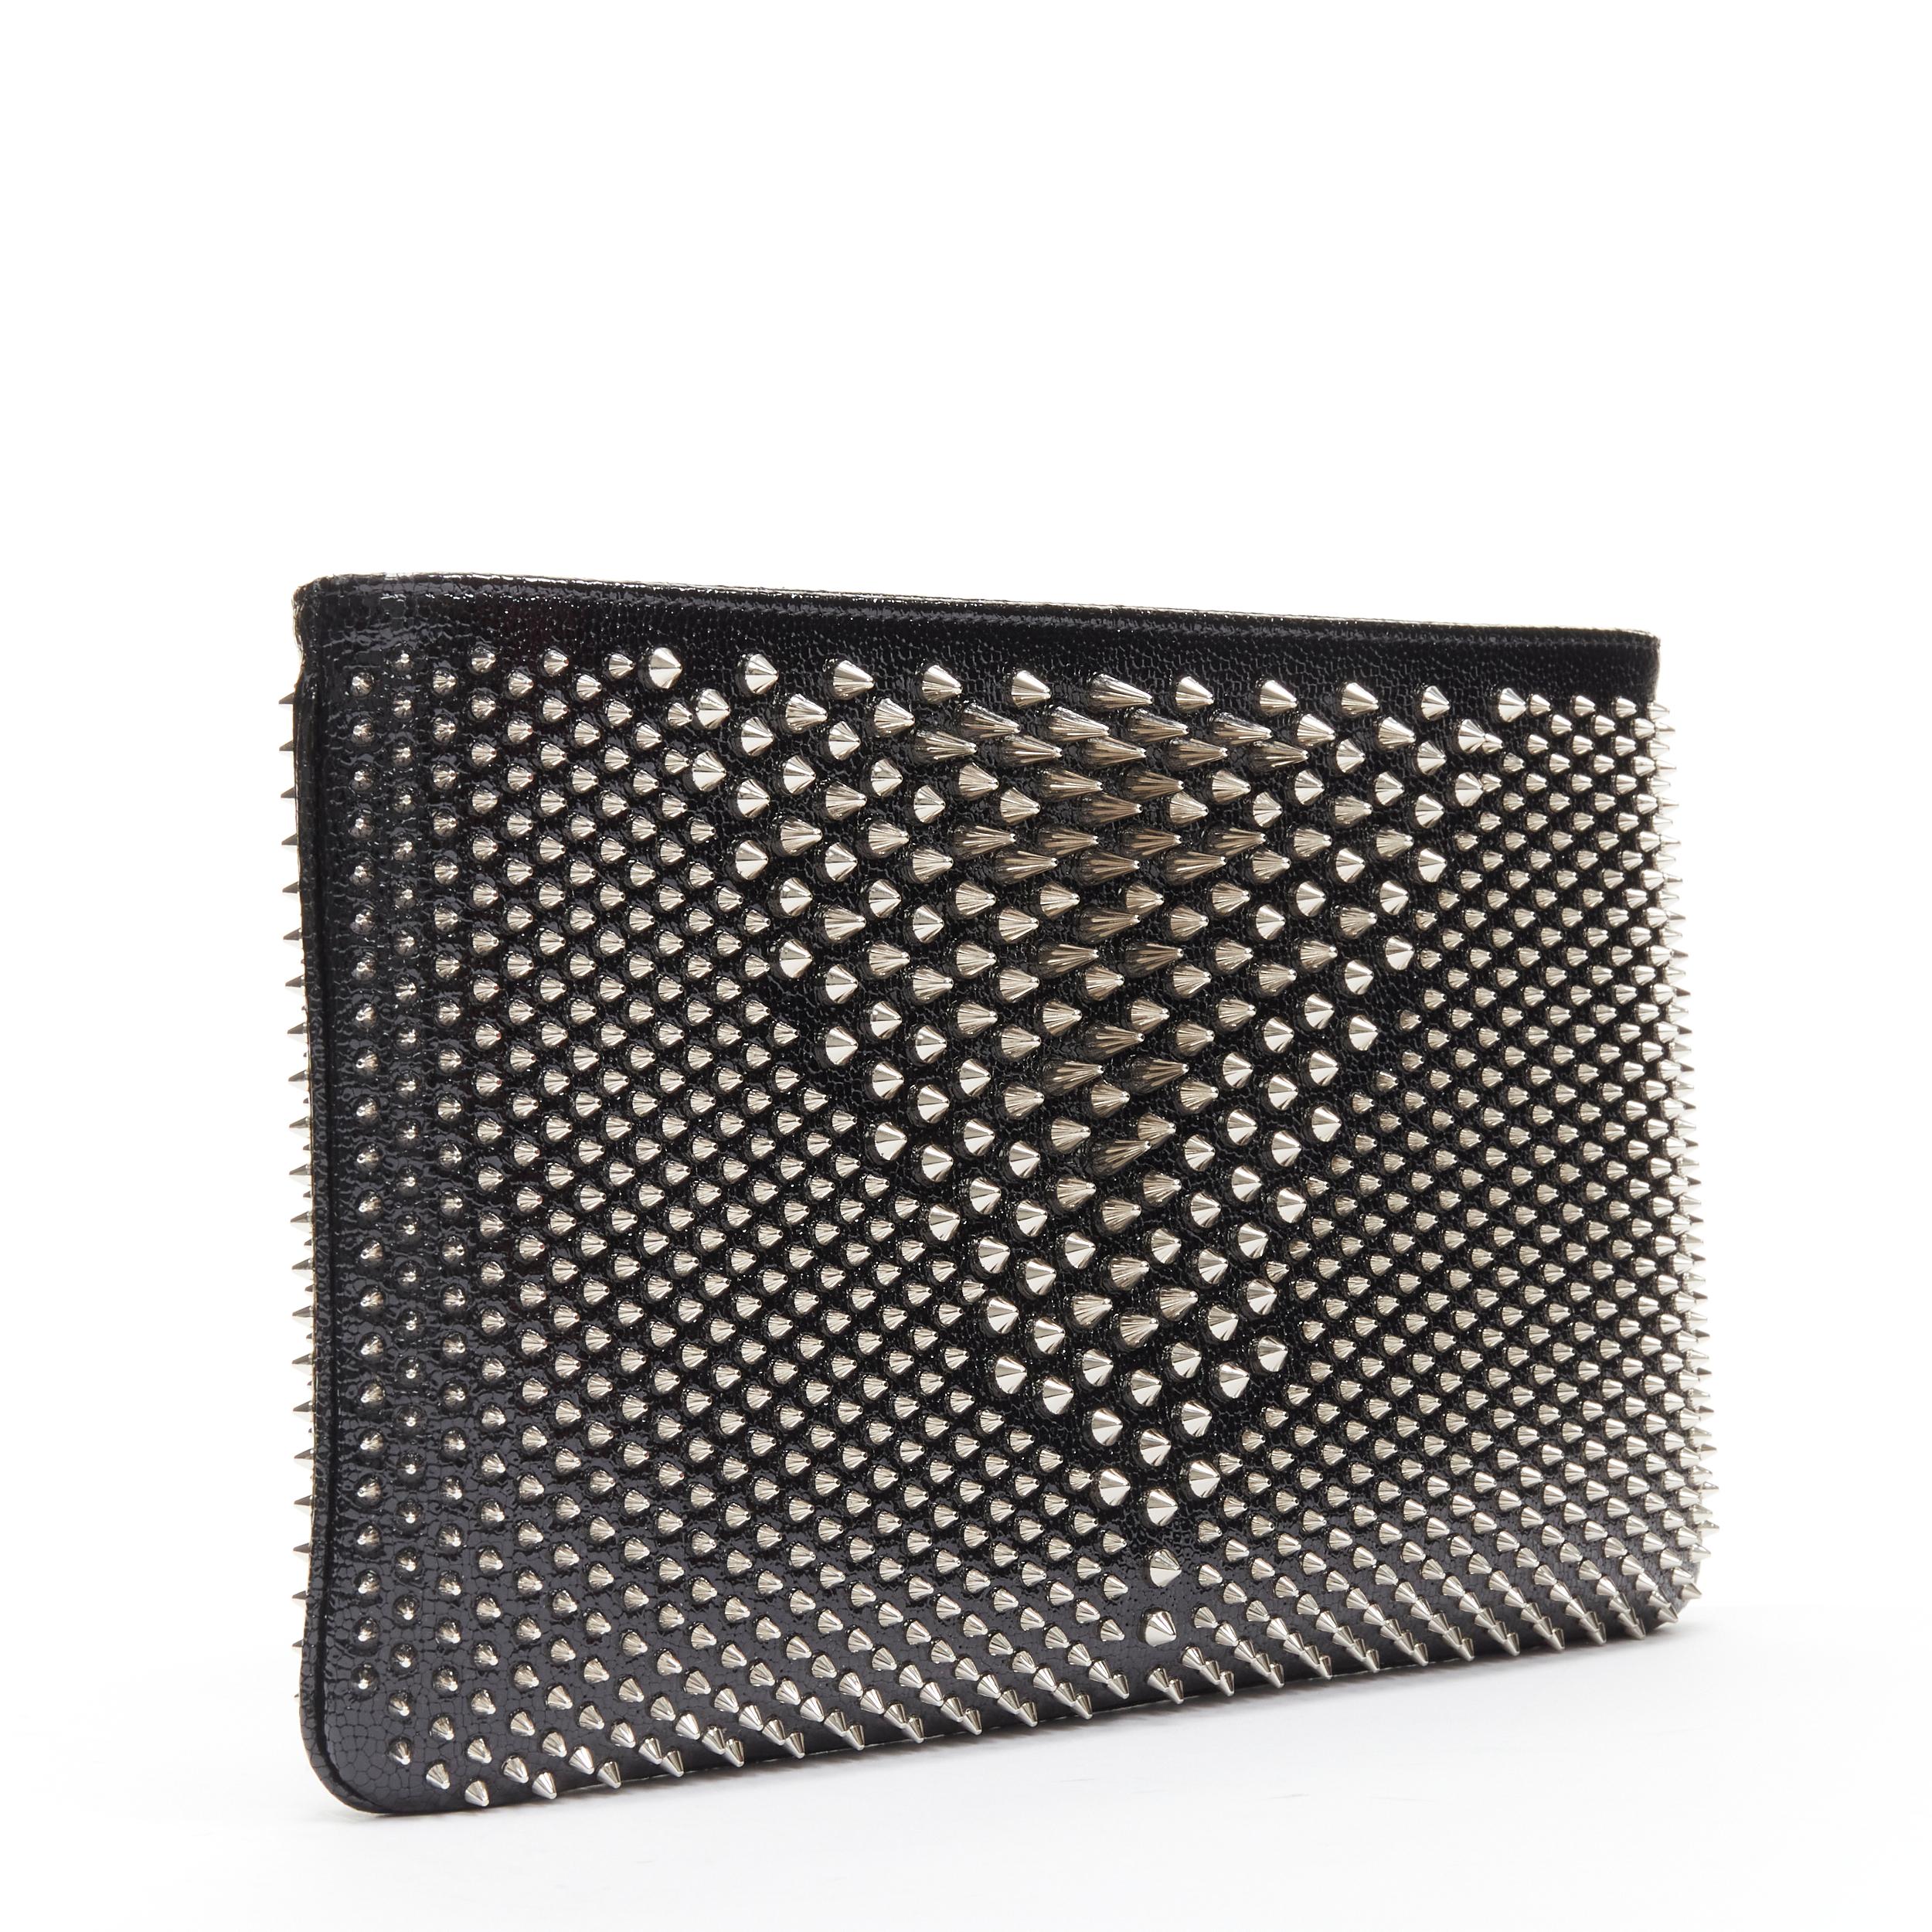 CHRISTIAN LOUBOUTIN Loubiposh spike stud leather crossbody shoulder clutch bag In Excellent Condition For Sale In Hong Kong, NT